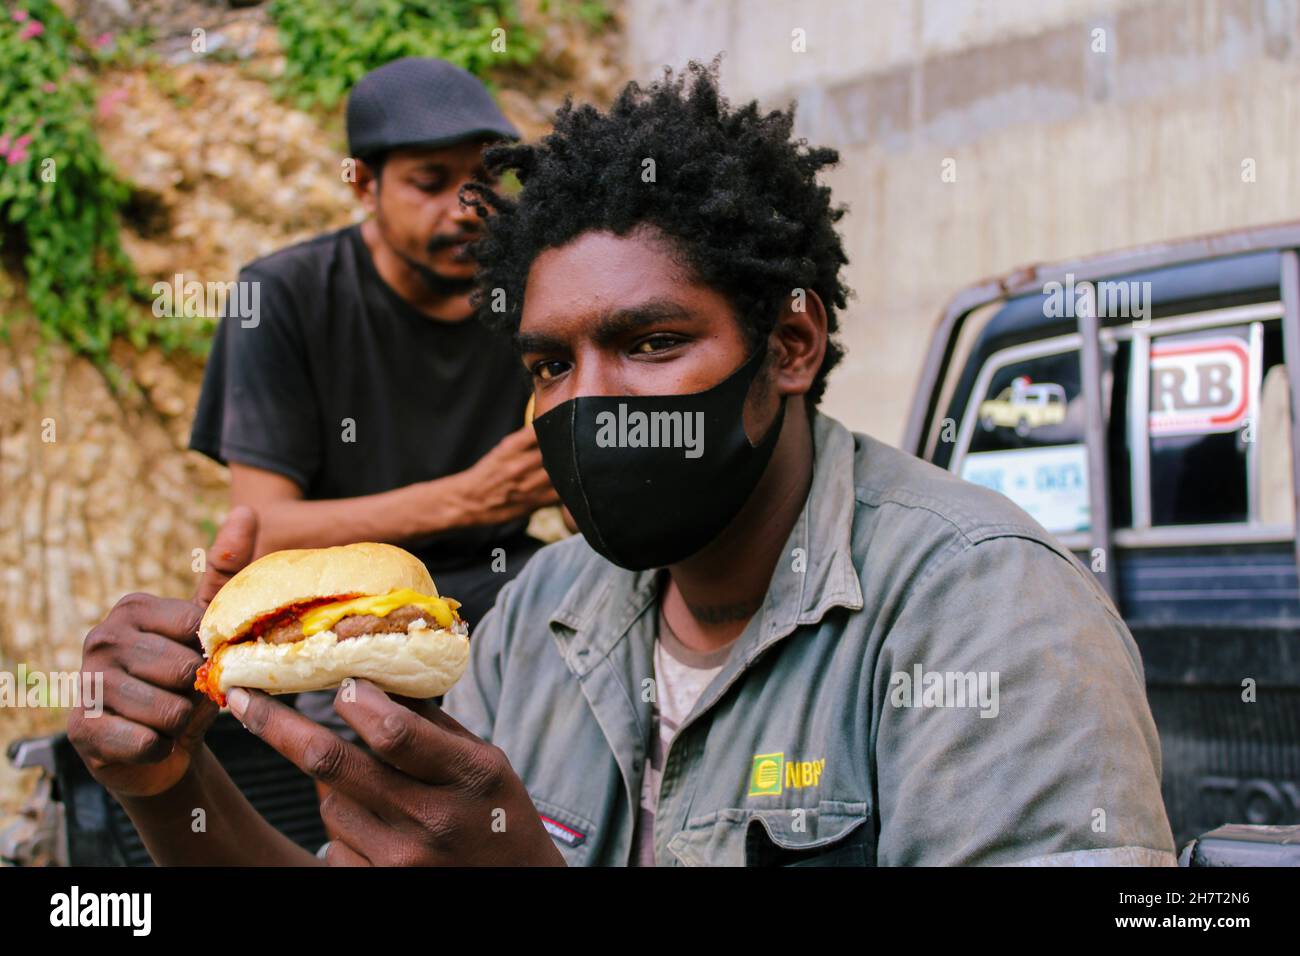 A Papua New Guinea foodie about to eat a burger in Port Moresby in November 2021 Stock Photo